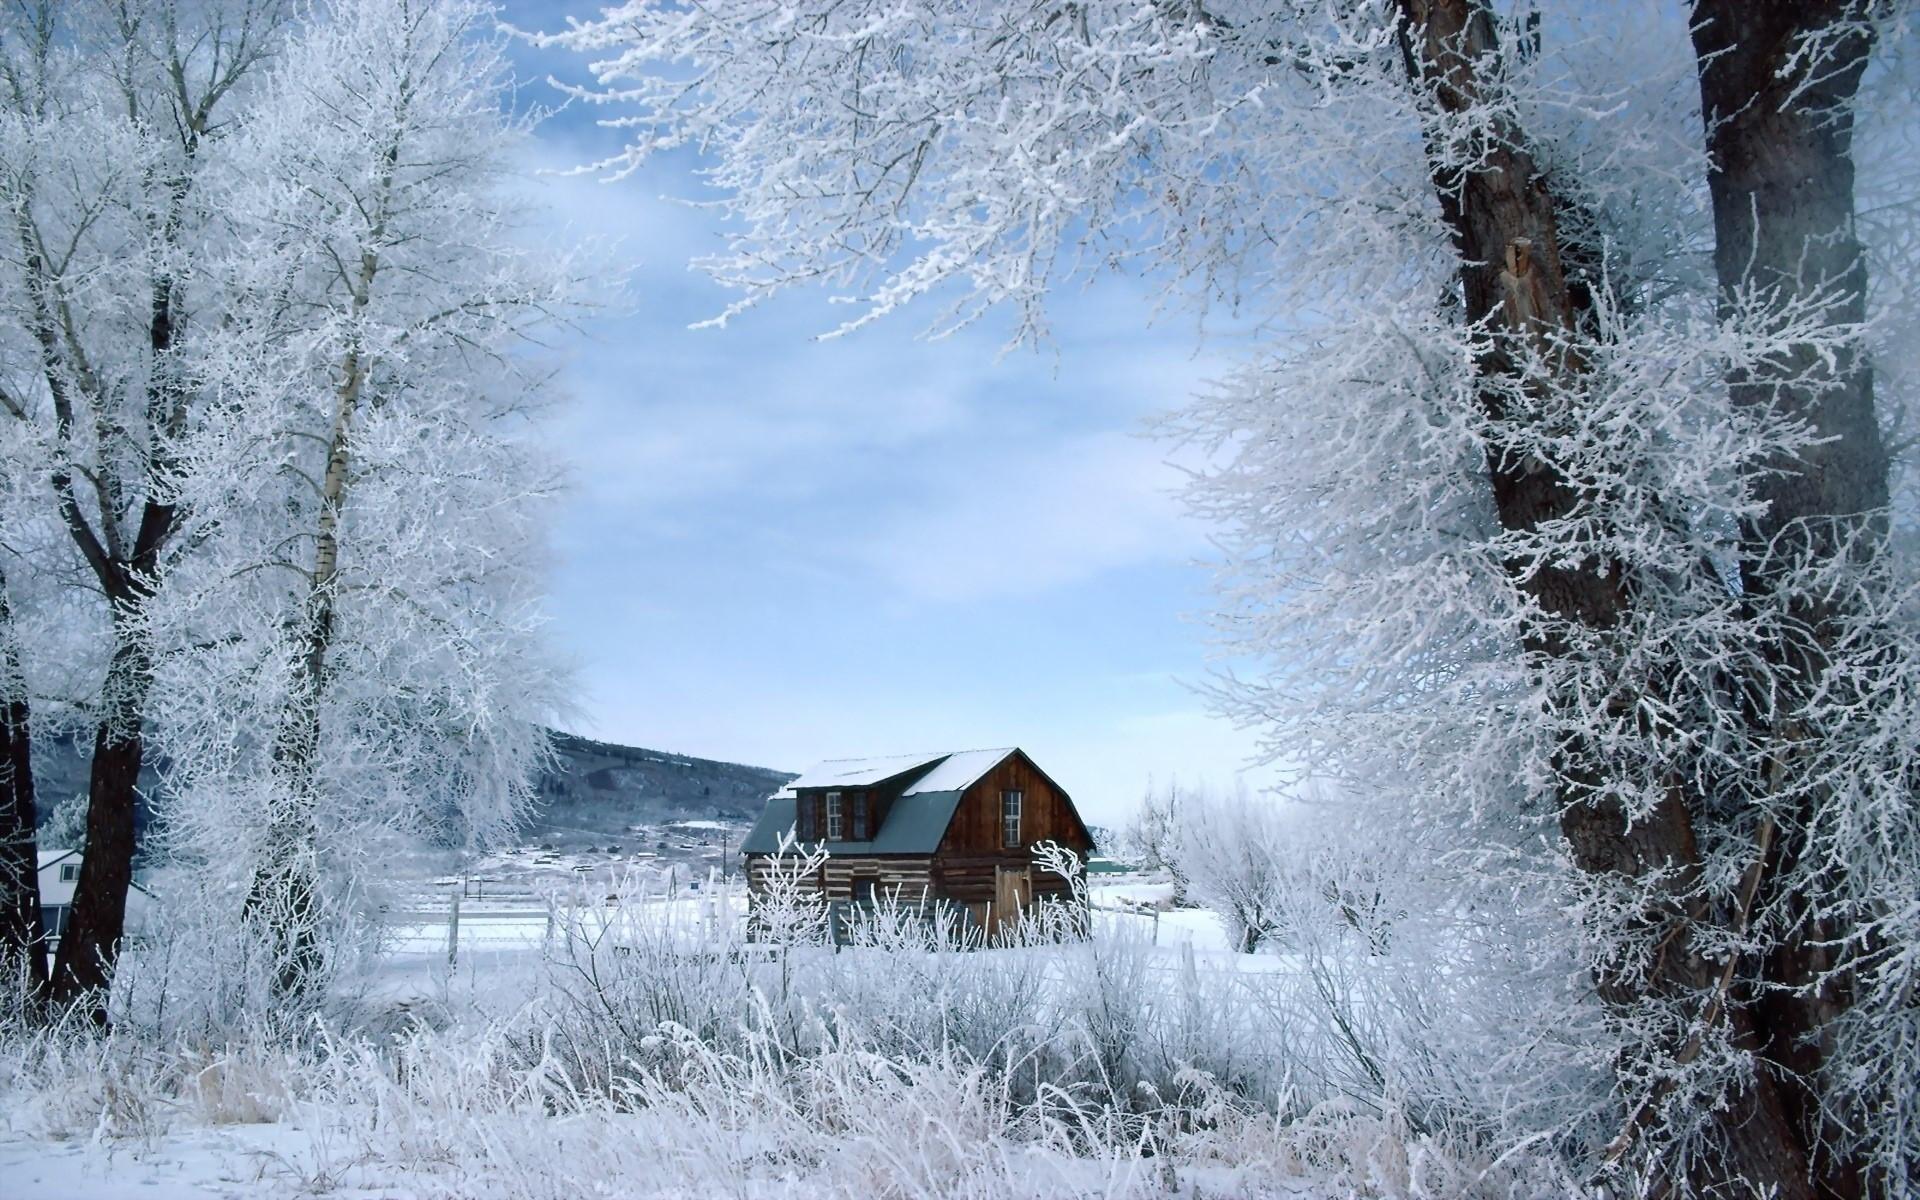 House, Trees, Hoarfrost wallpaper and background. Nature